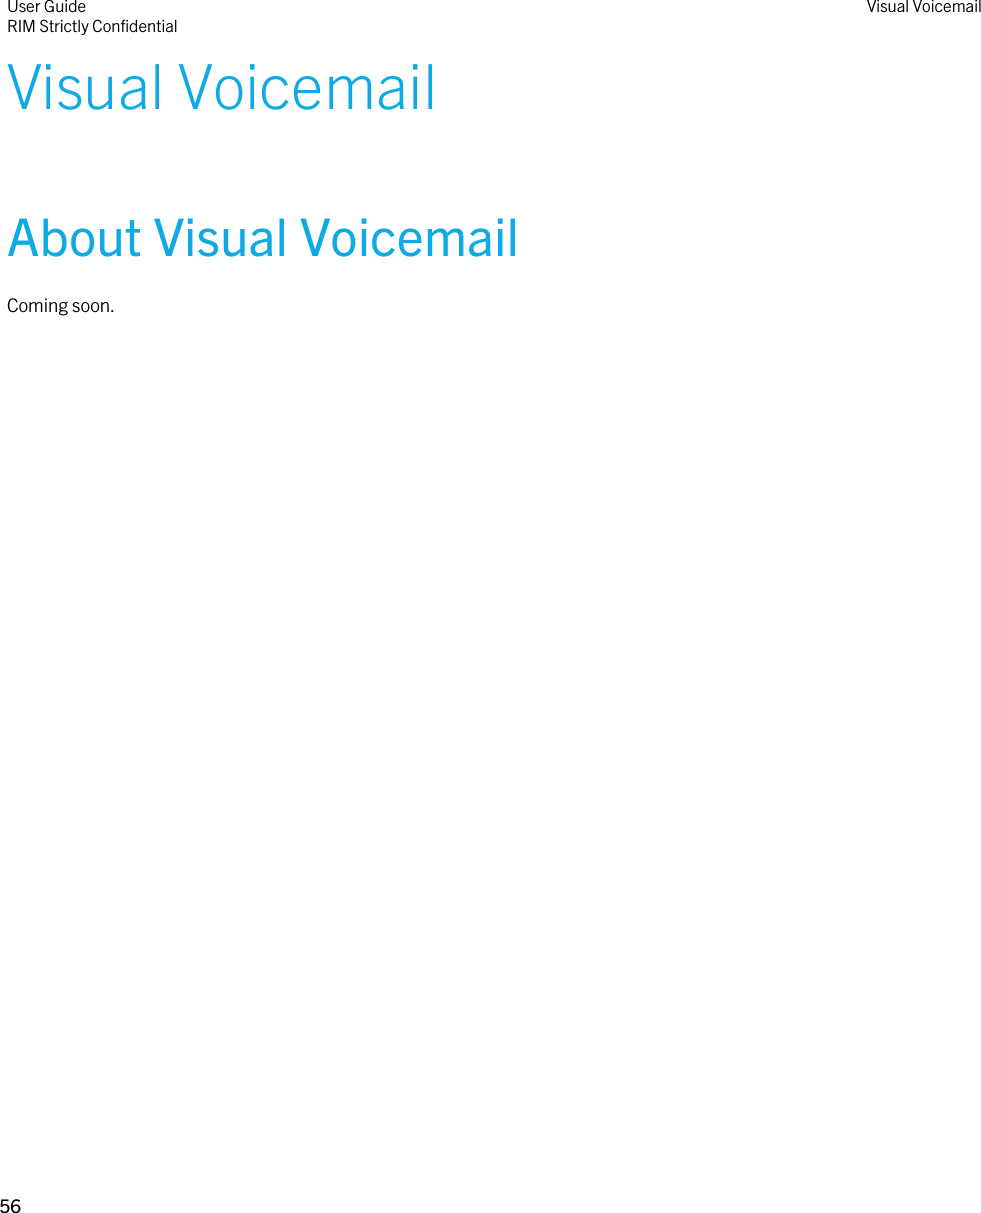 Visual VoicemailAbout Visual VoicemailComing soon.User GuideRIM Strictly Confidential Visual Voicemail56 